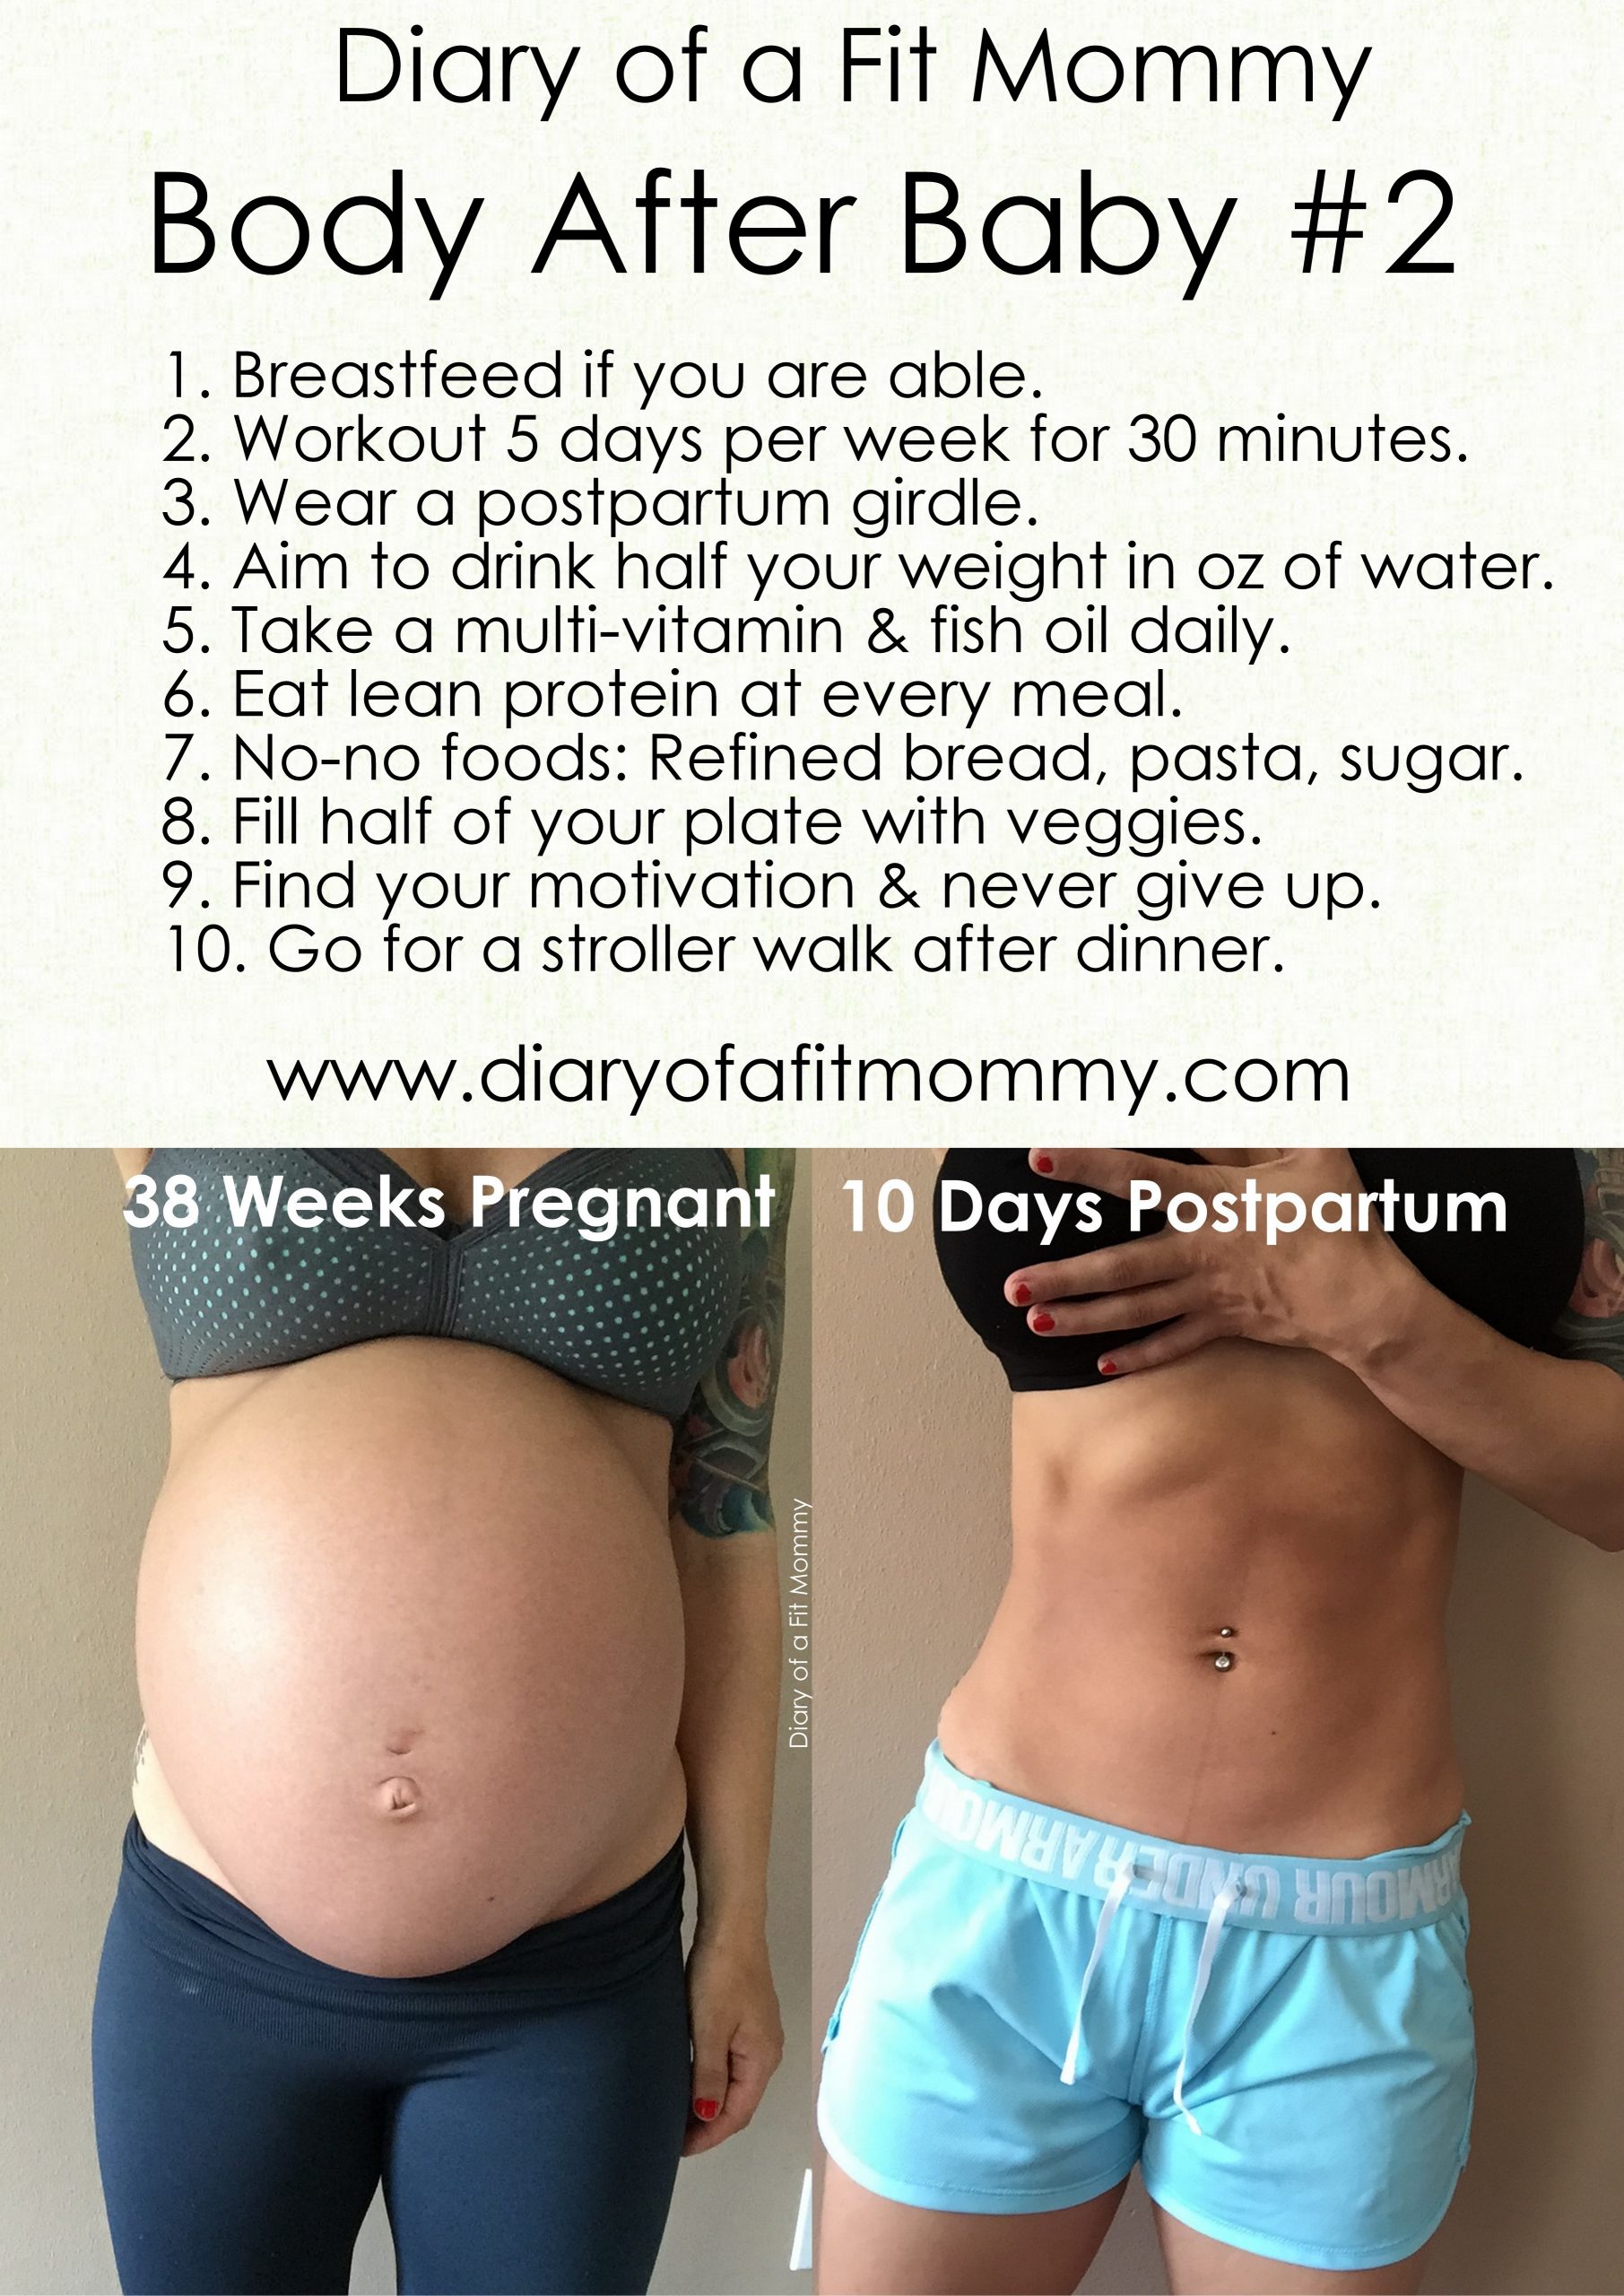 How I Got My Body Back After Baby #2